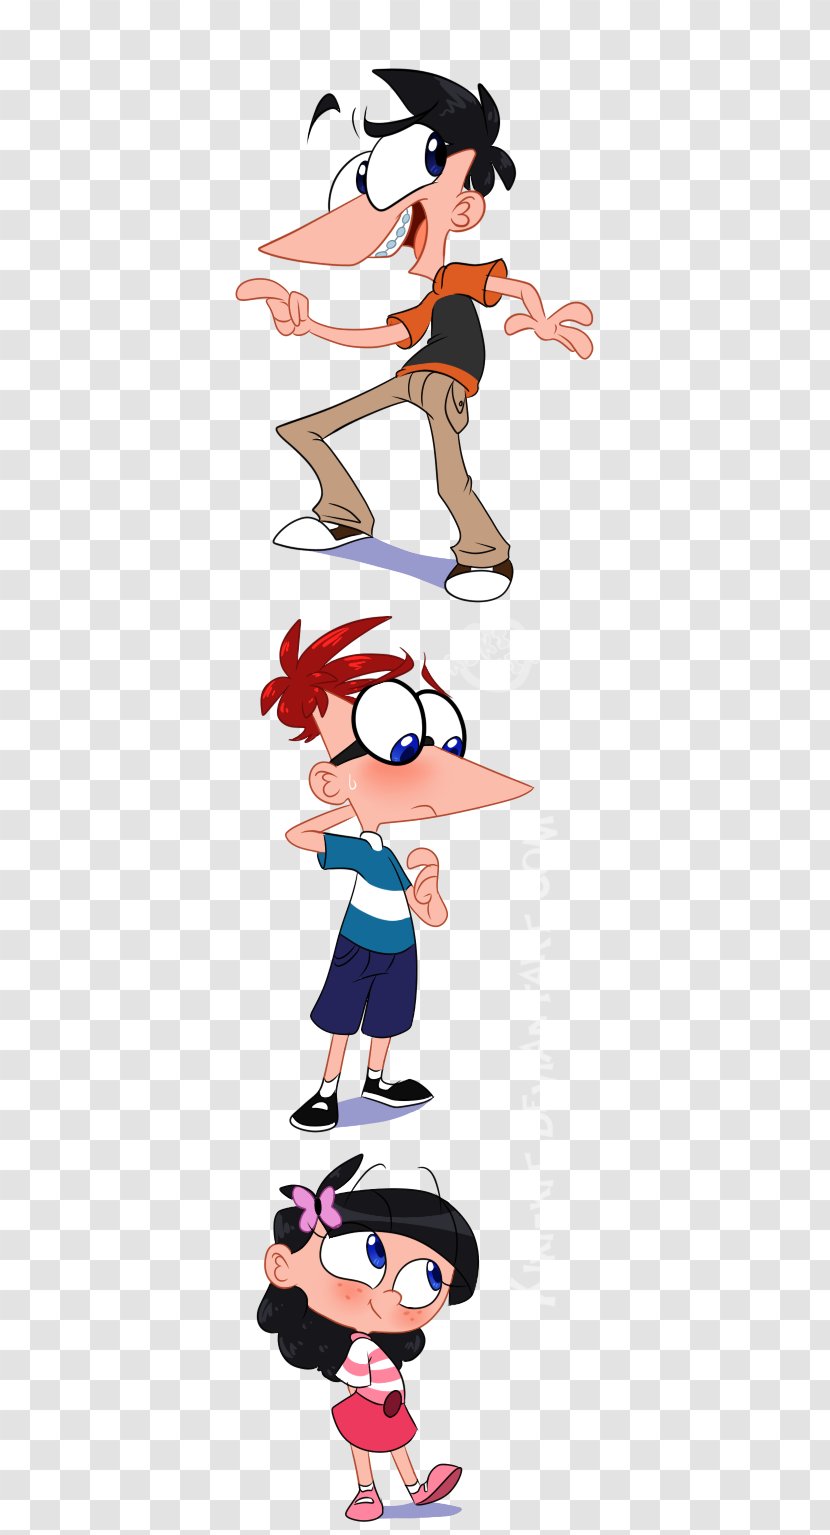 Clip Art Illustration Animated Cartoon Physical Fitness - Fiction - Phineas And Ferb Isabella Vore Transparent PNG